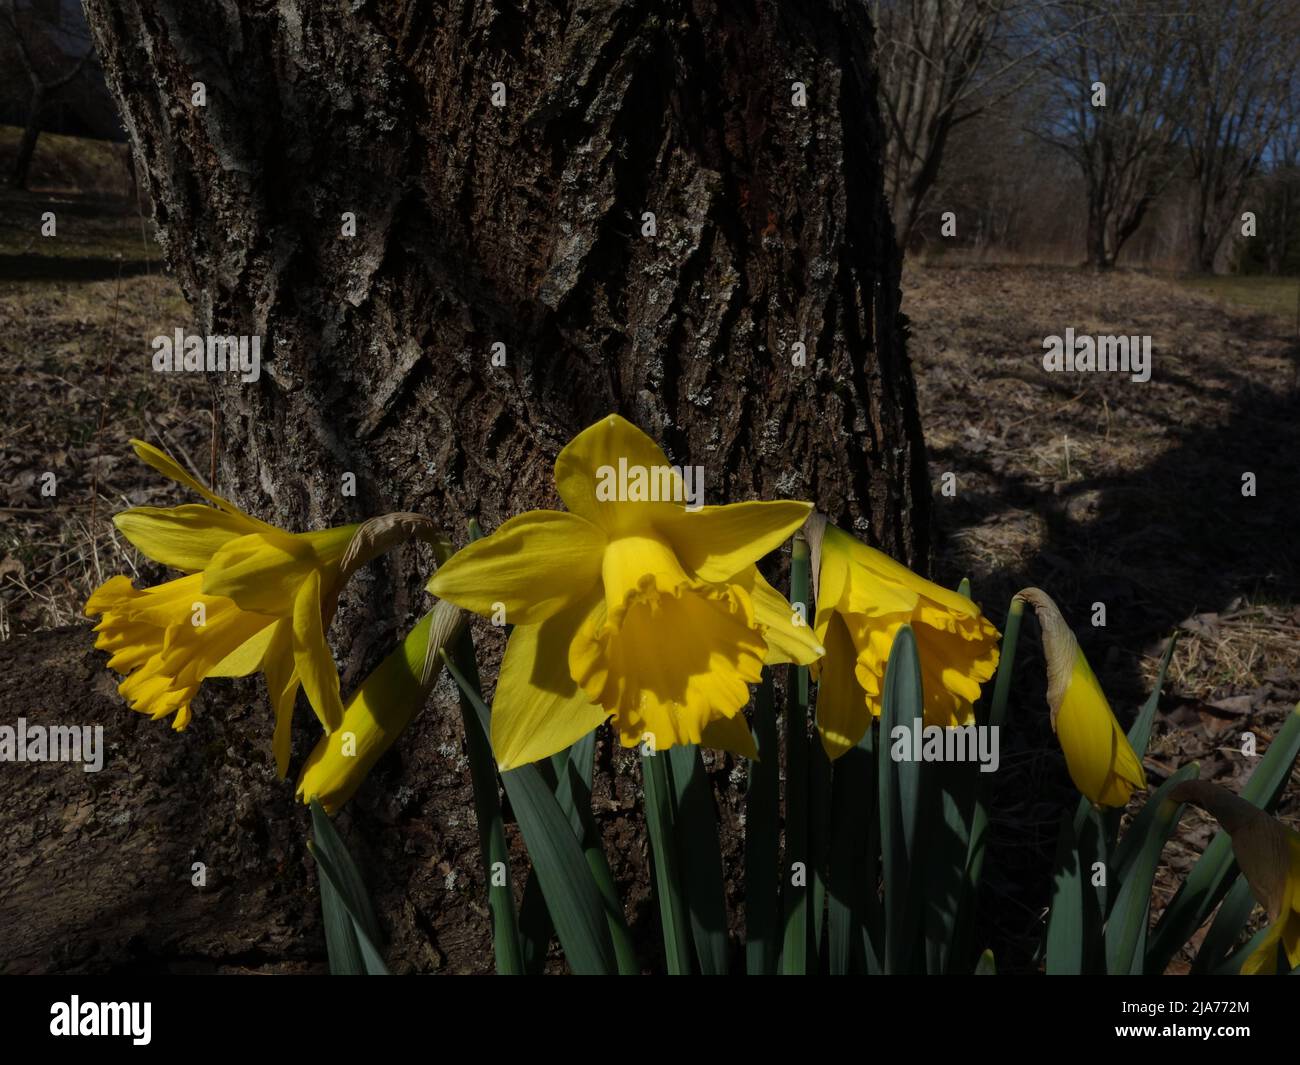 A beautiful group of daffodils stand close together, by a tree trunk. Stock Photo